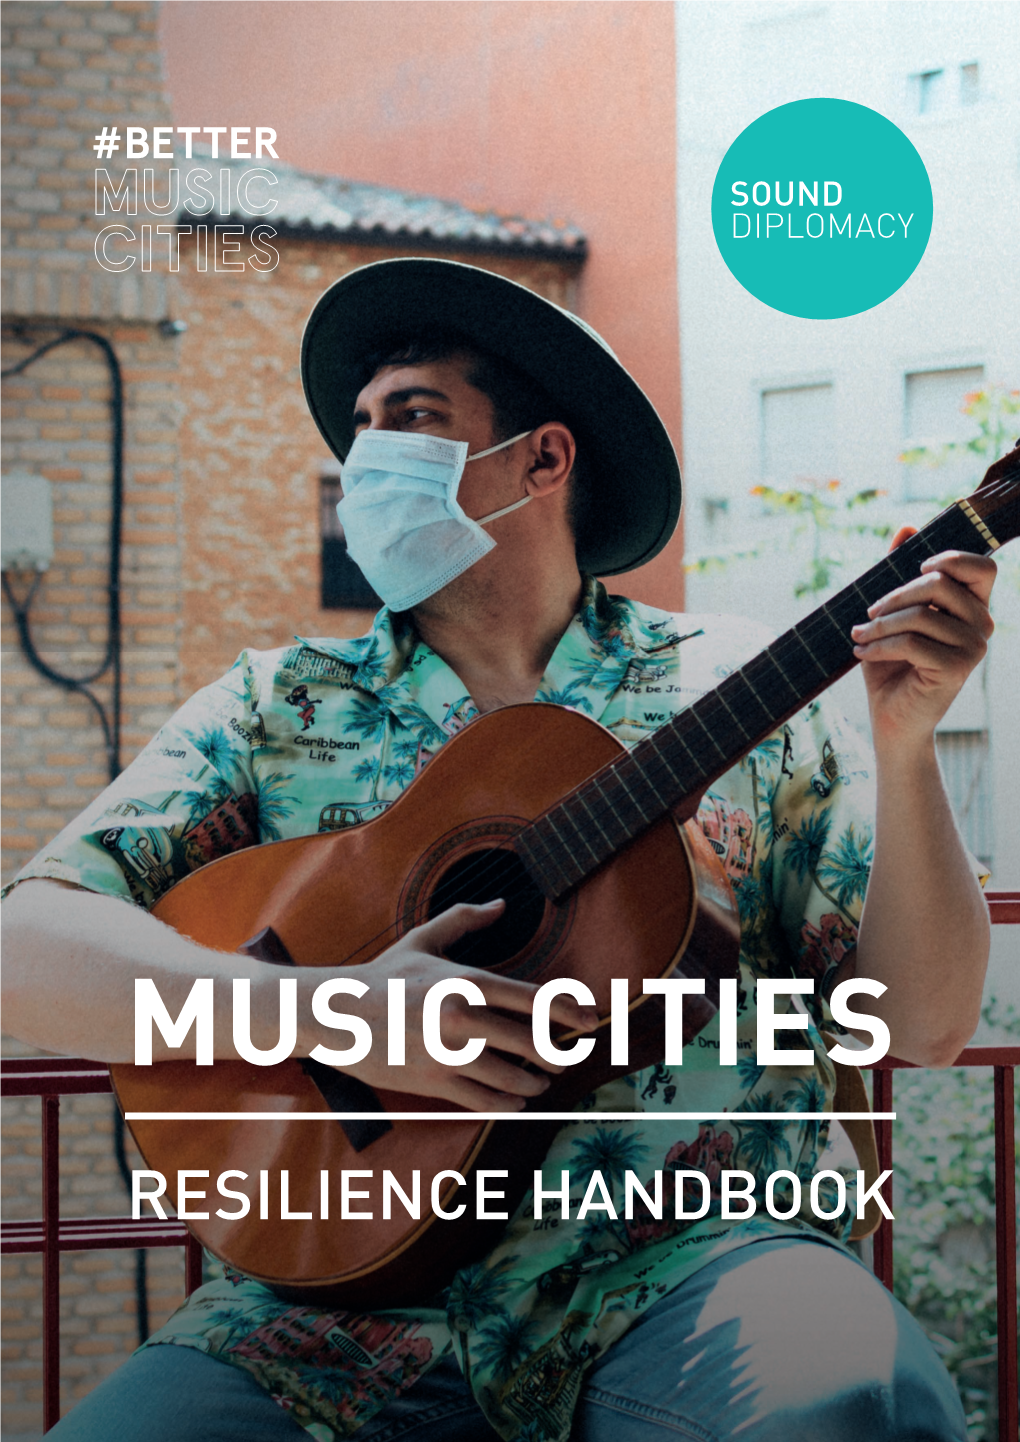 Resilience Handbook a Rich and Music Cities Vibrant Music Resilience Handbook Scene Brings a Building Better Music Cities Lot of Happiness